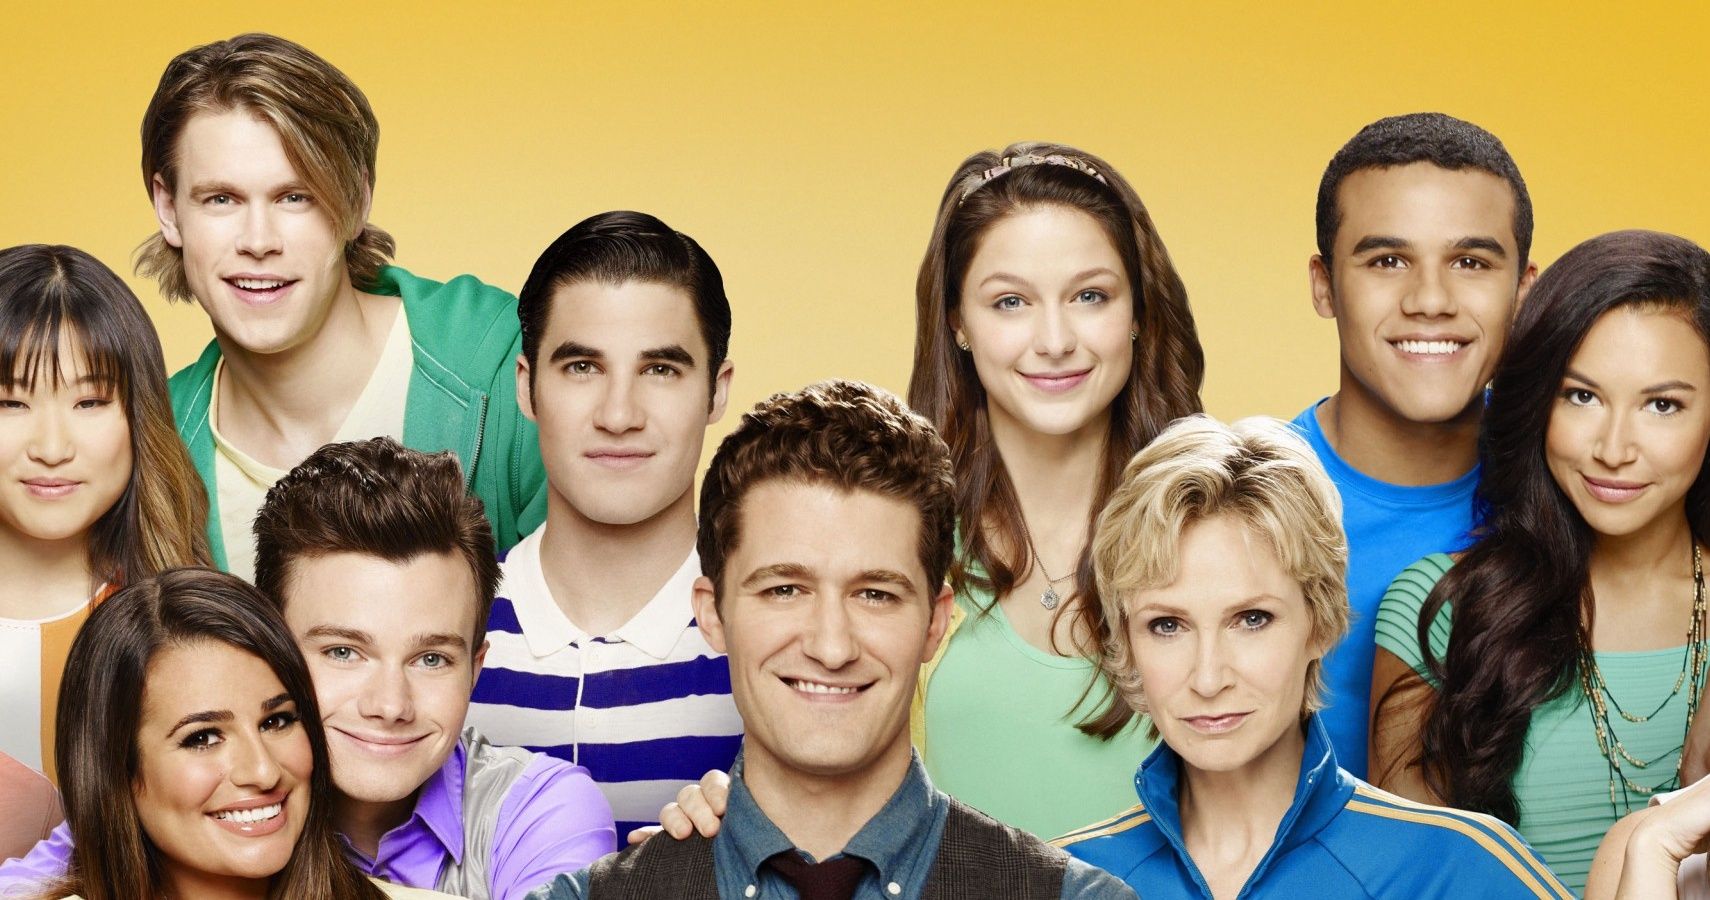 Glee 5 Reasons Why It Deserves A Revival Or Reboot Today 5 Reasons Why It Doesn T